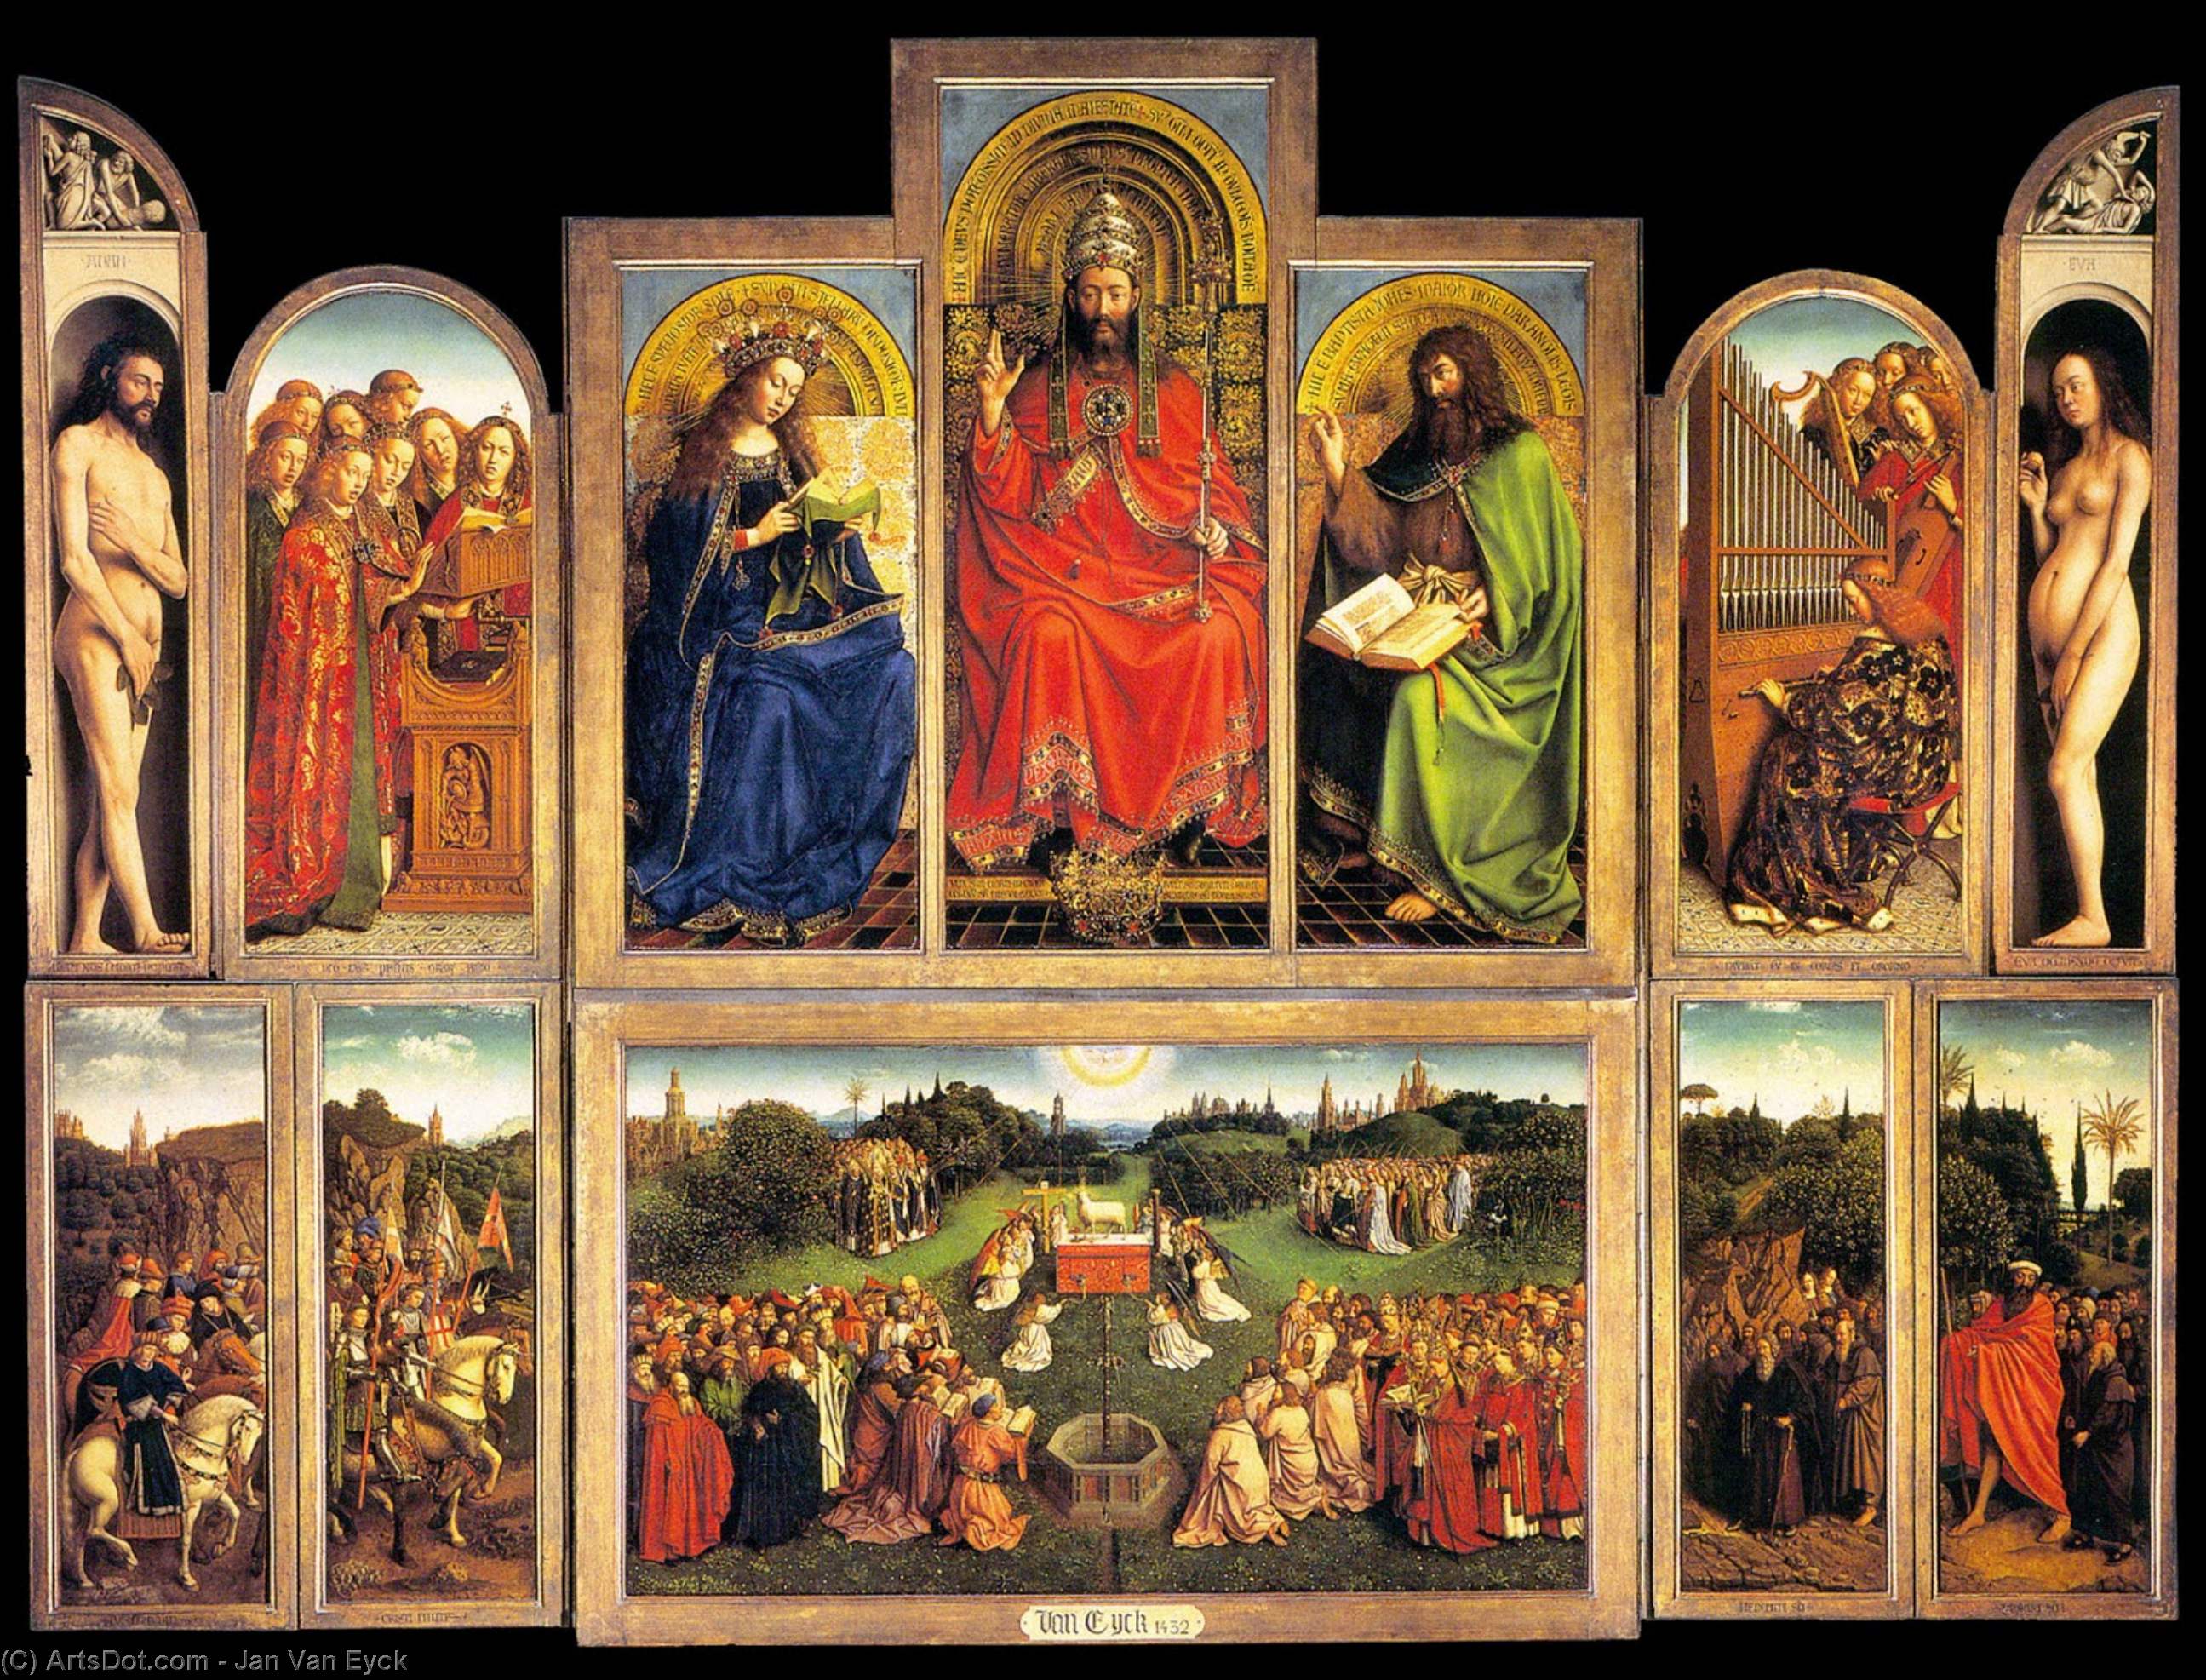 Master of the Aachen Altarpiece - Sell & Buy Works, prices, biography